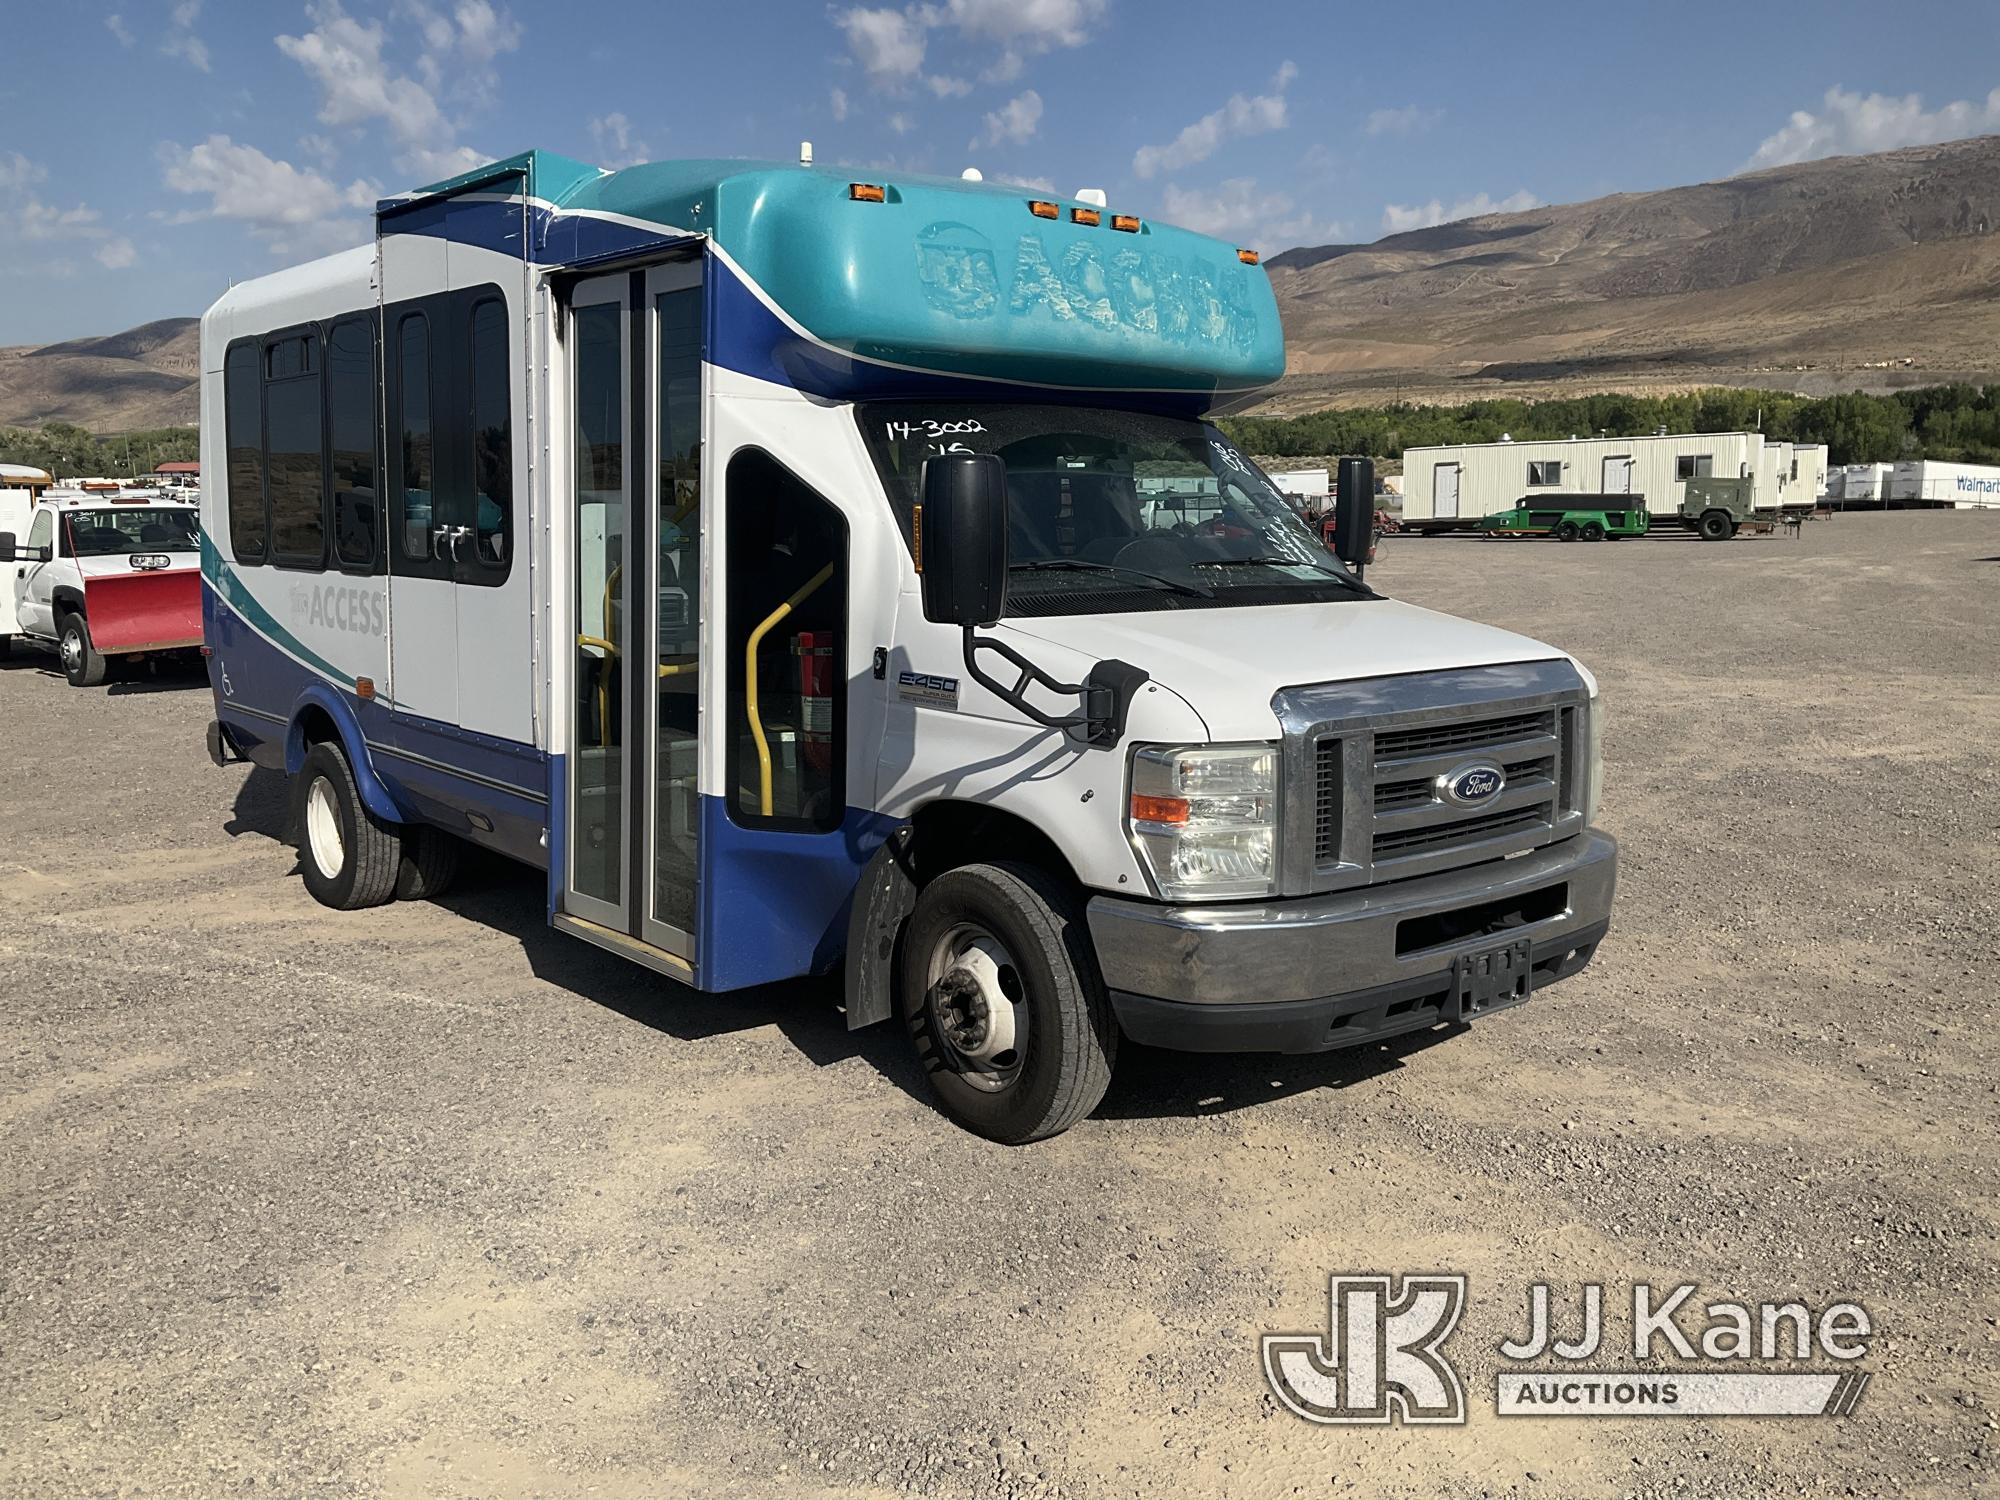 (McCarran, NV) 2015 Ford E450 Bus, Located In Reno Nv. Contact Nathan Tiedt To Preview 775-240-1030